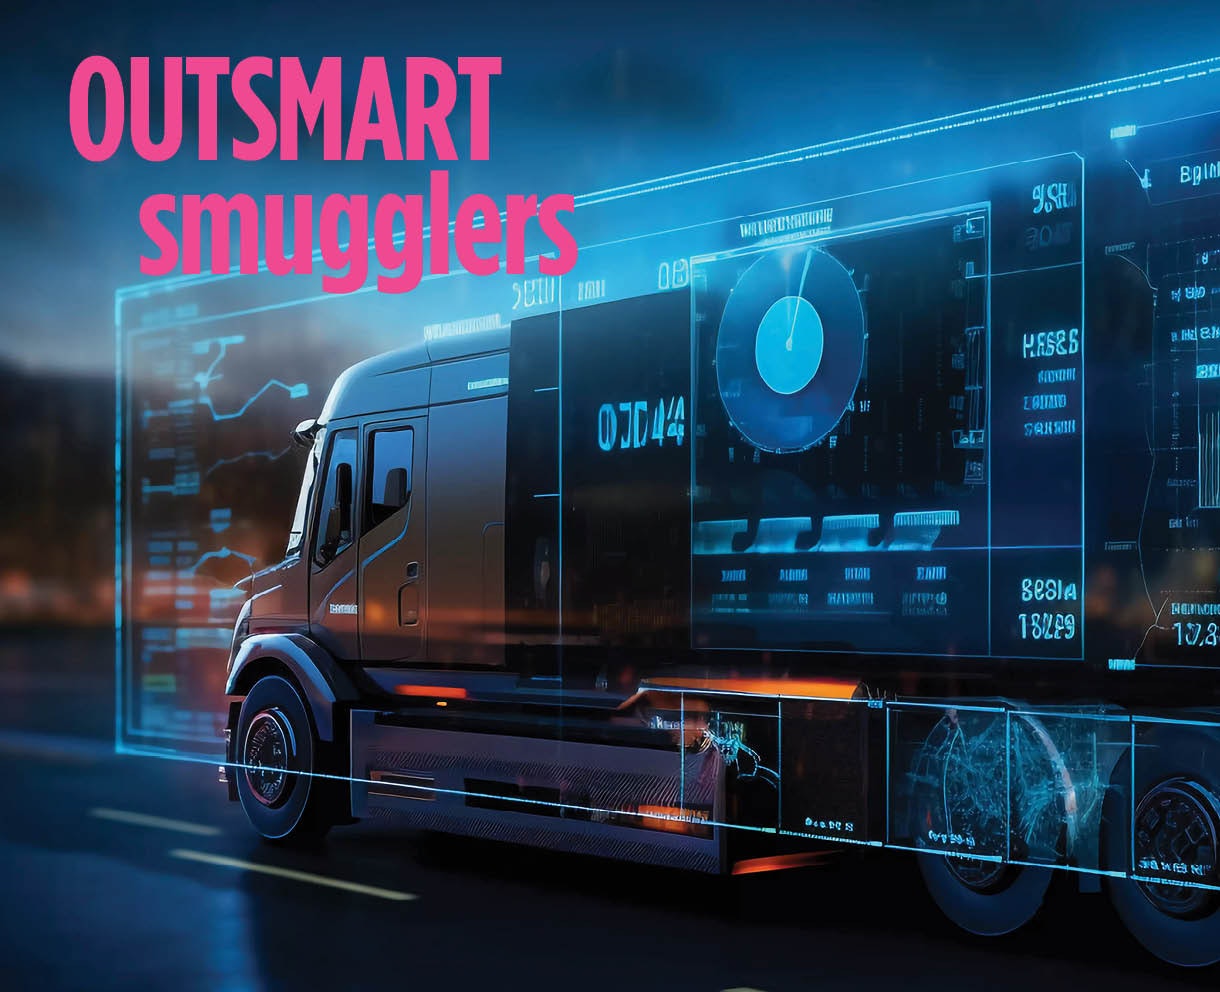 Outsmarting Smugglers: Contraband detection in the era of AI